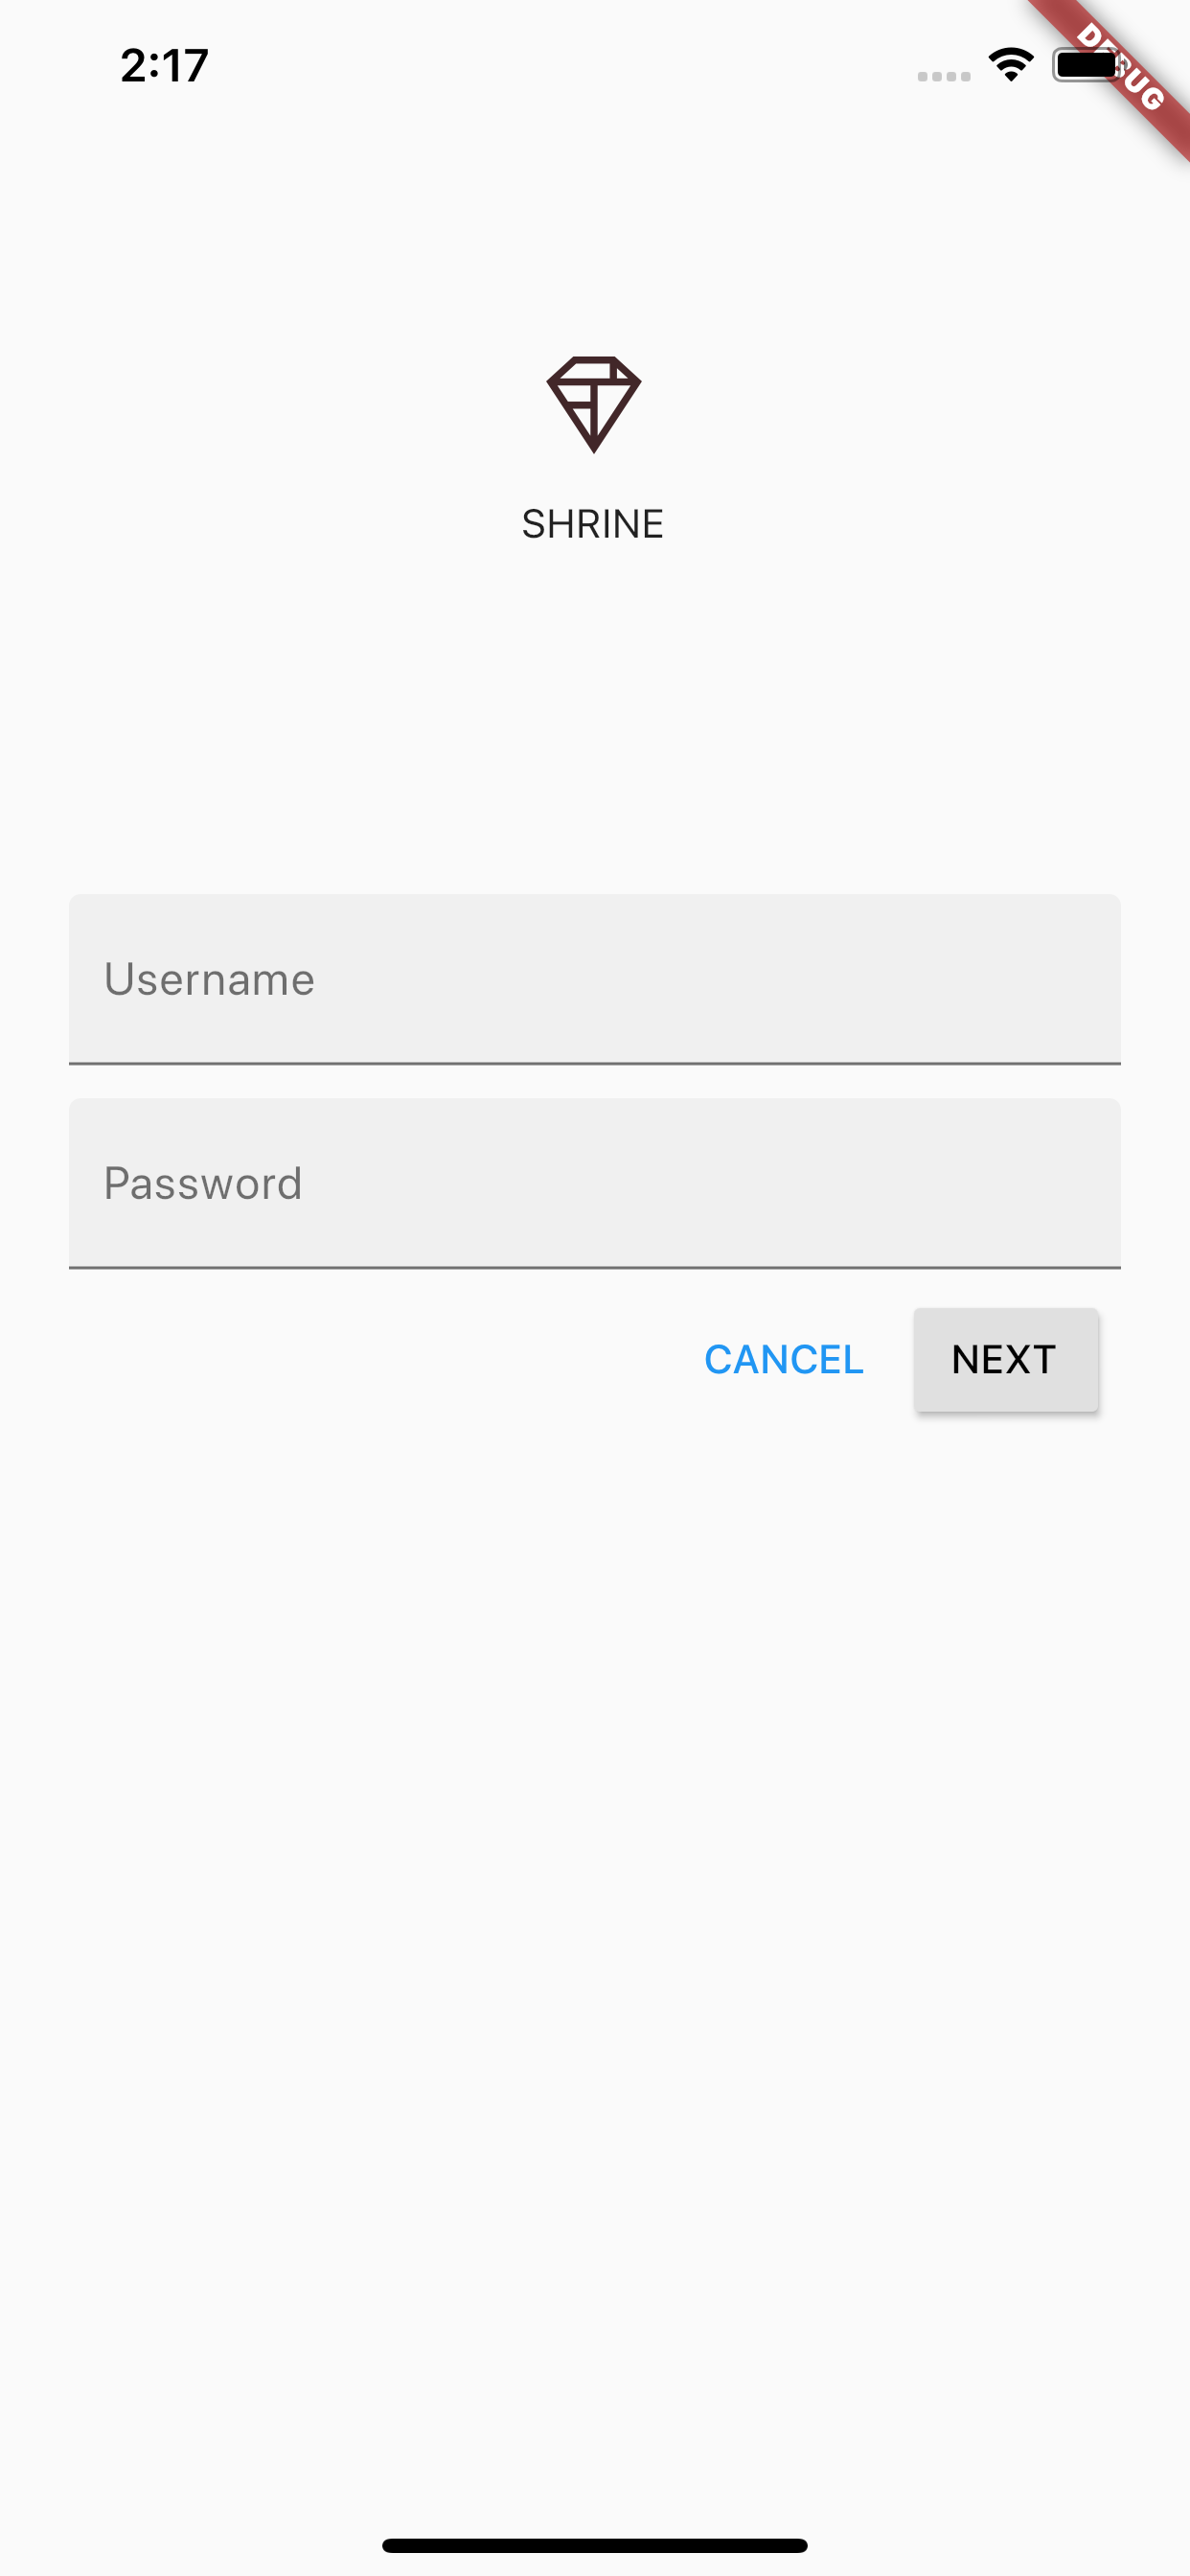 login page with username and password fields, cancel and next buttons